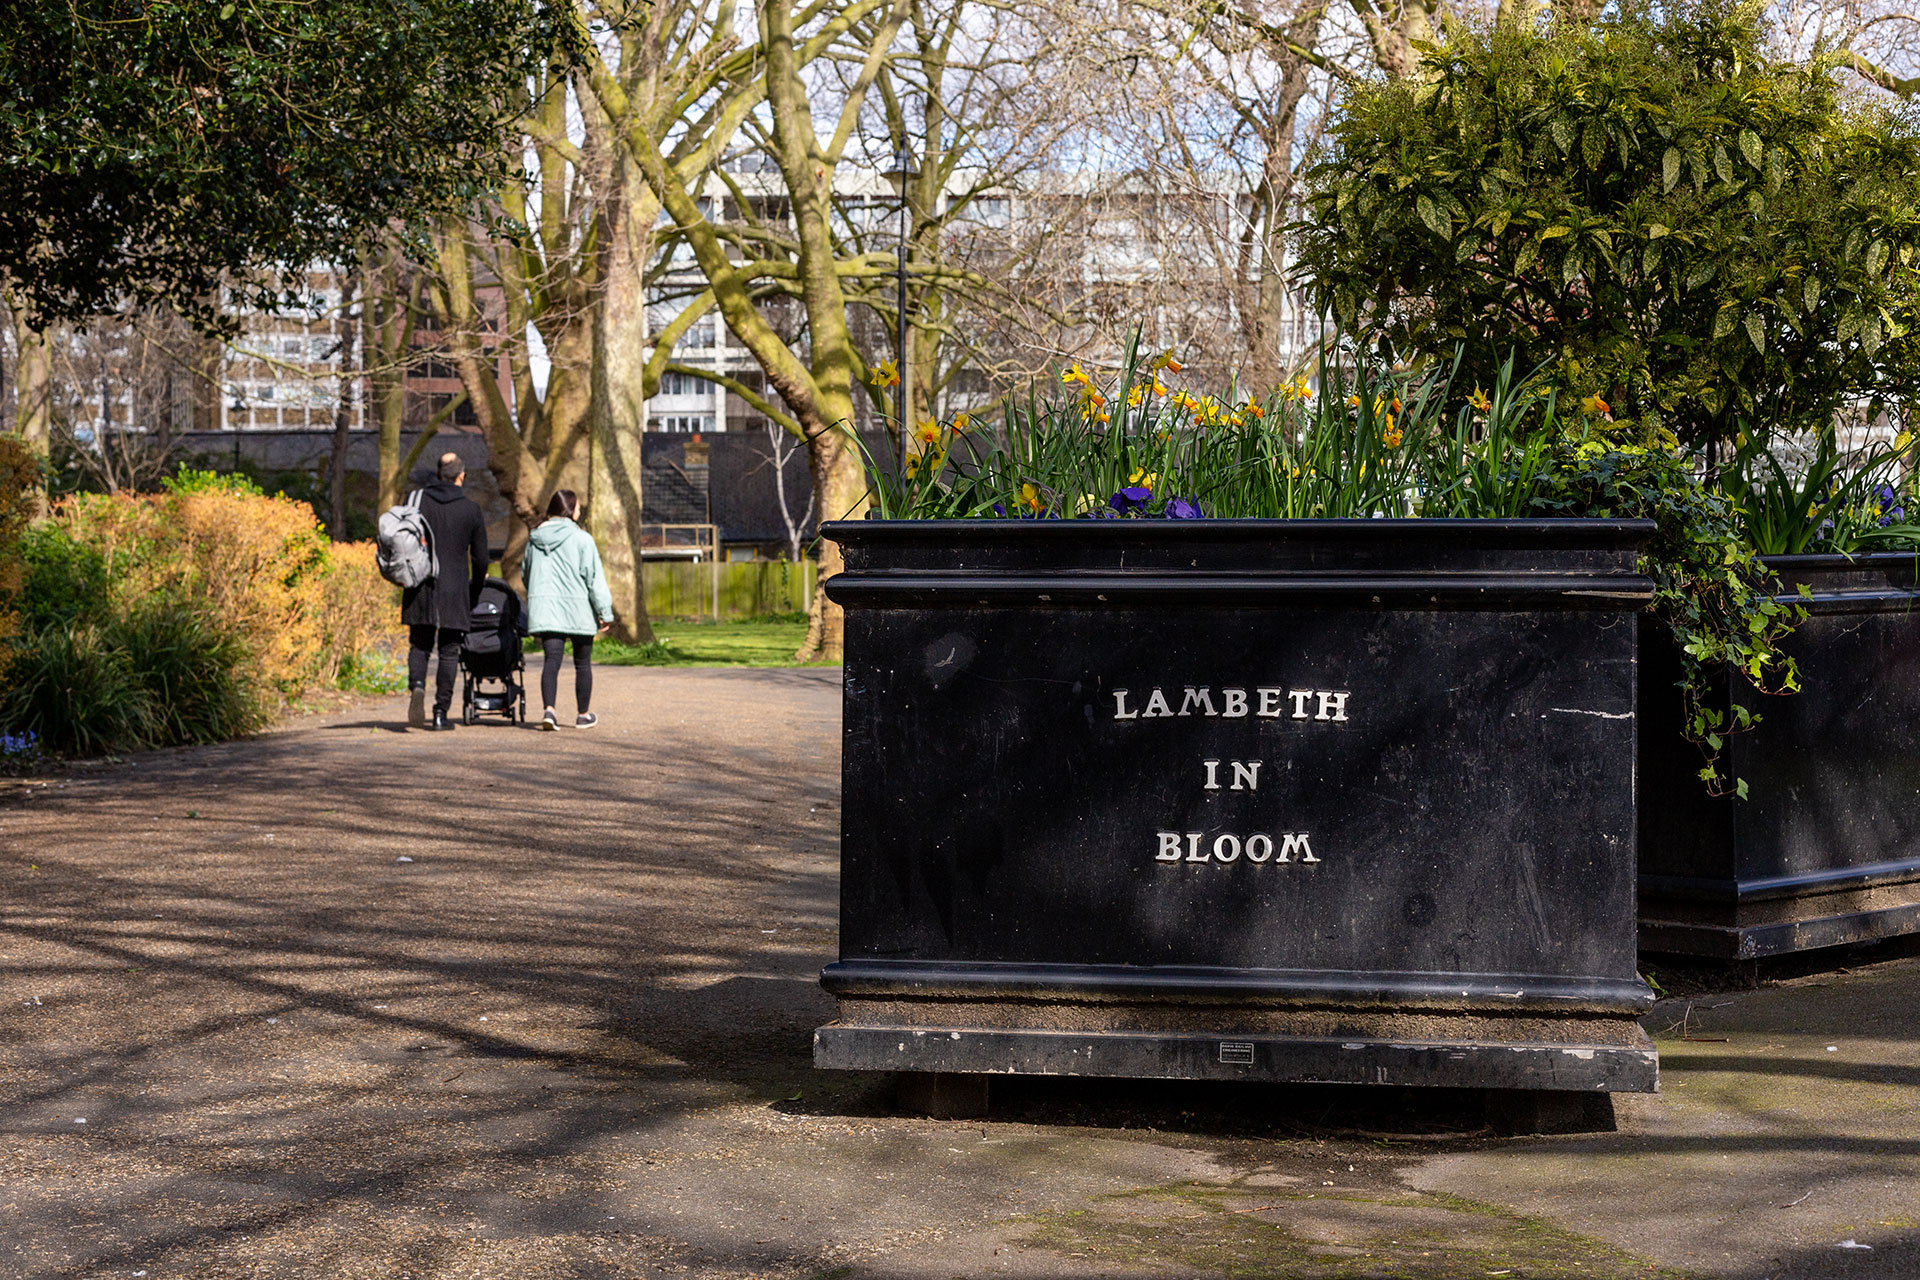 Park with a planter that has the label 'Lambeth in bloom'